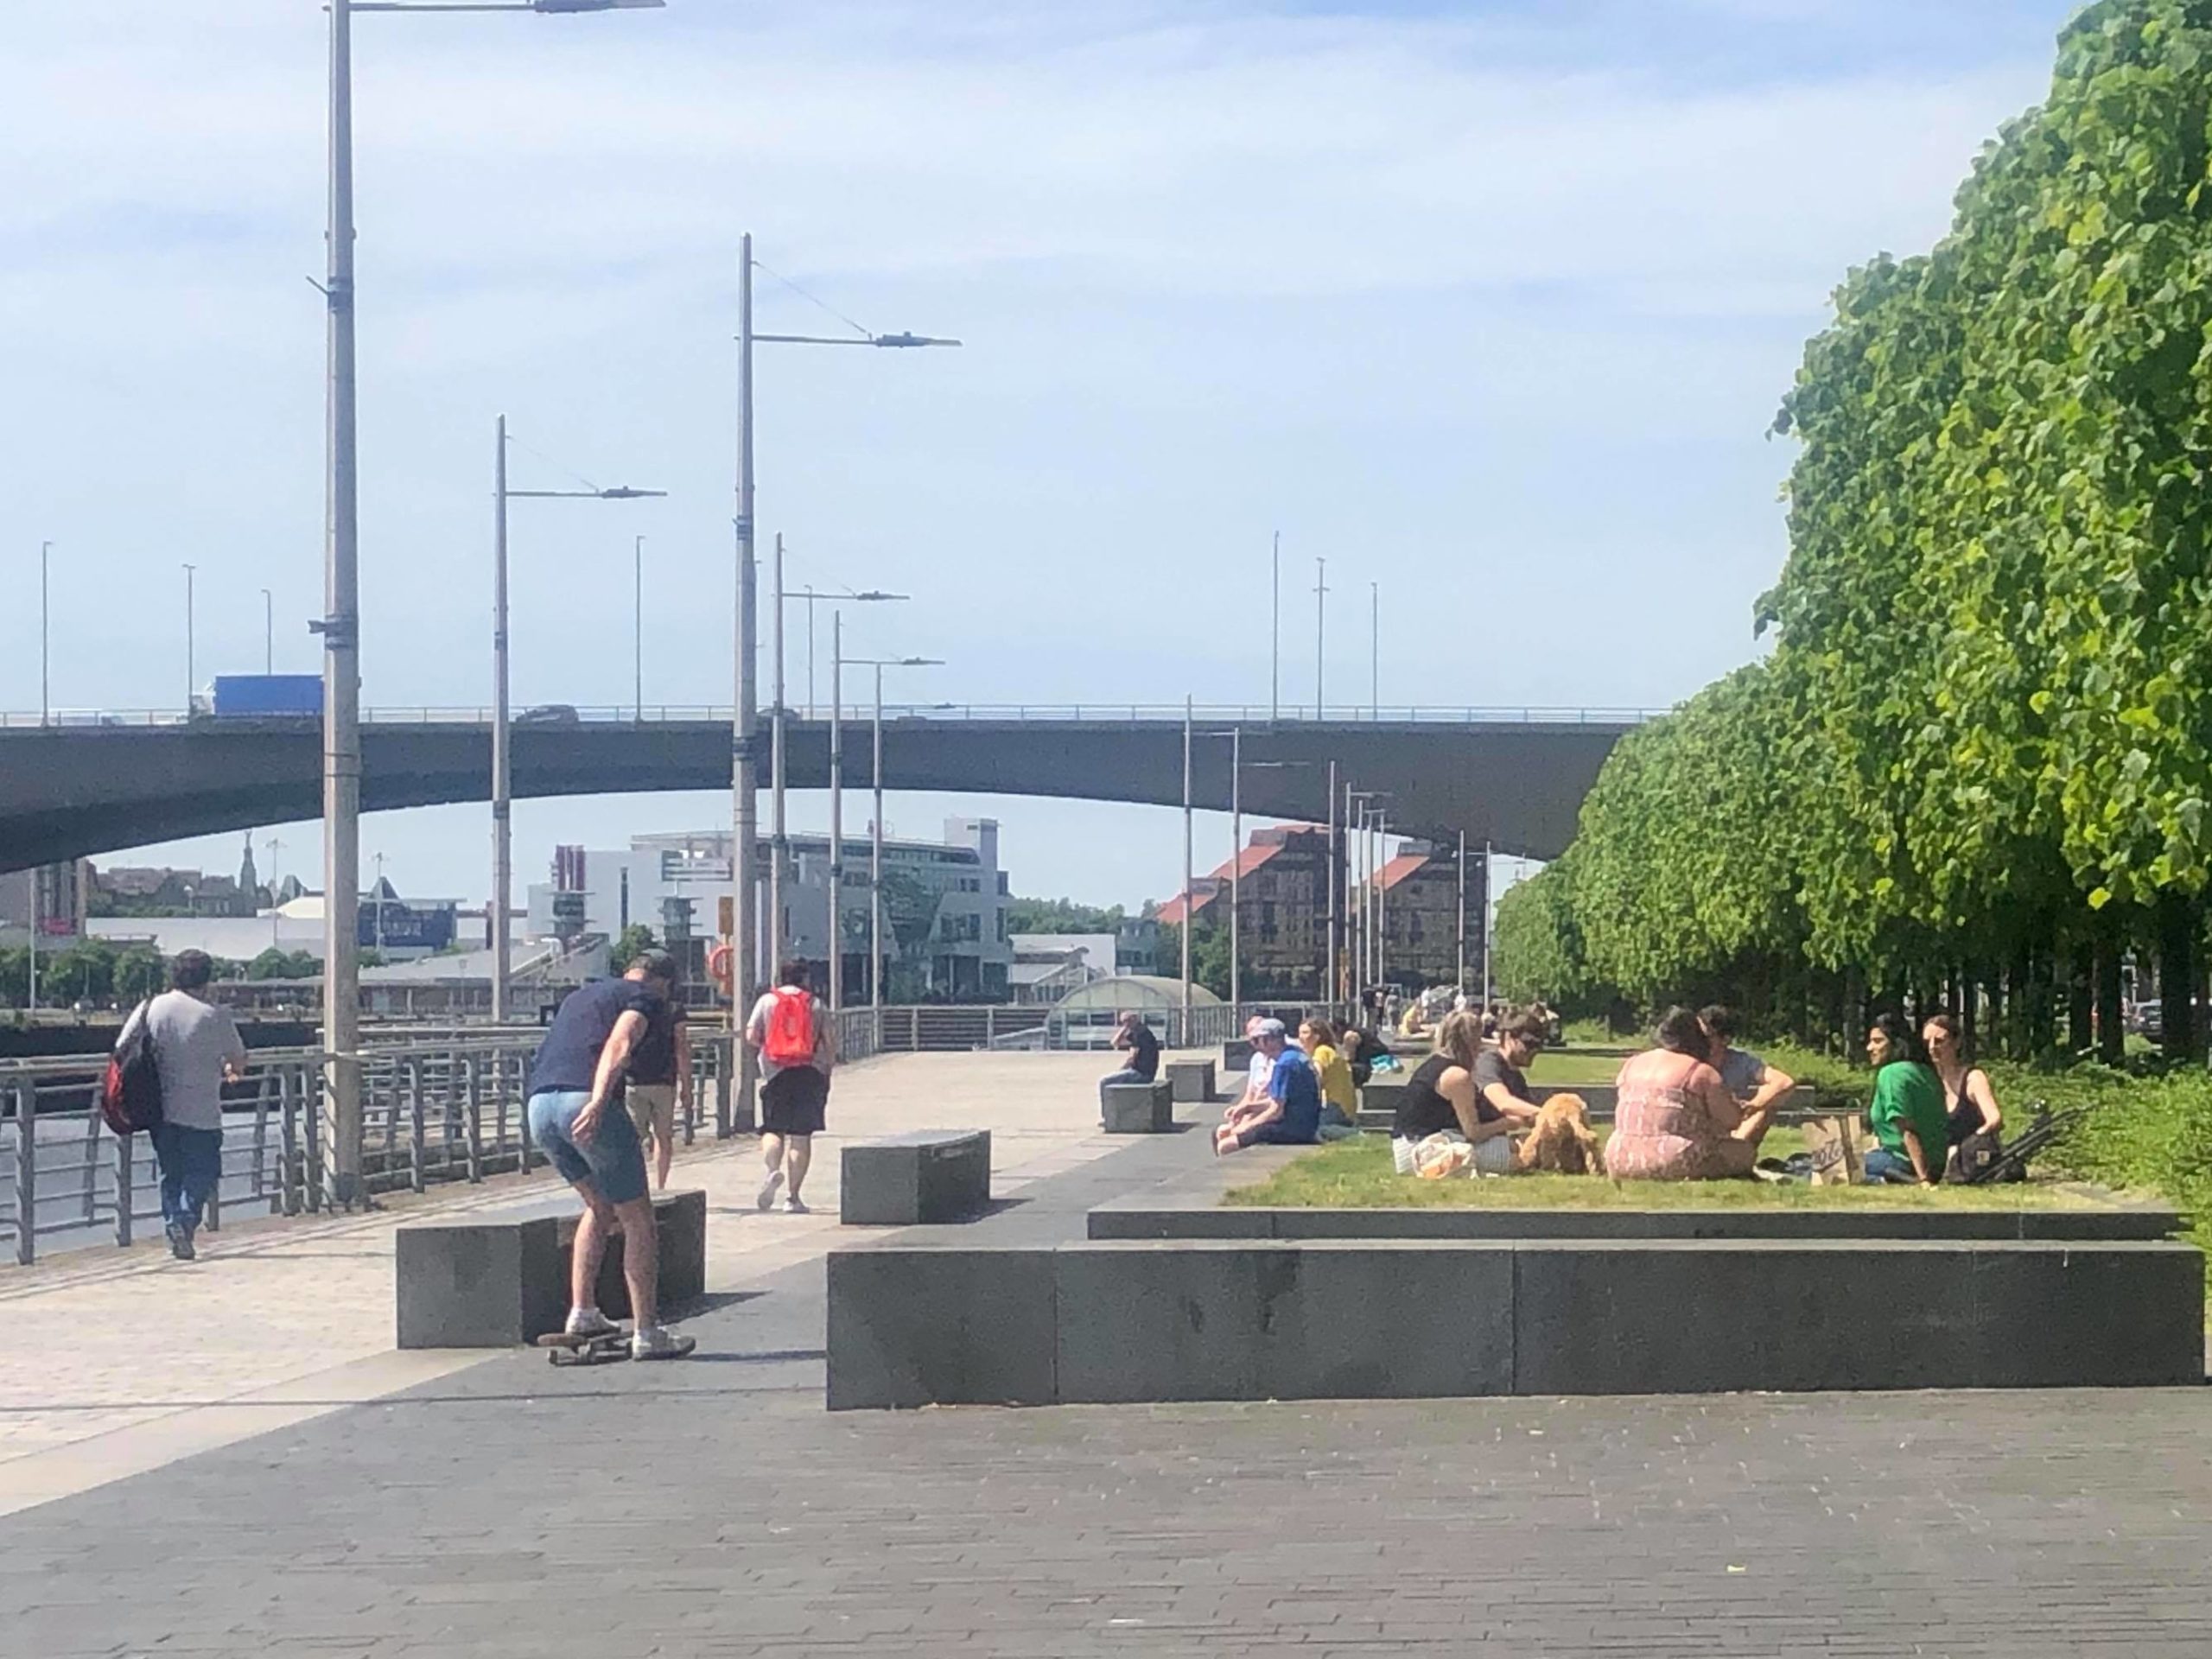 Locals soak up the sun next to the Clyde.